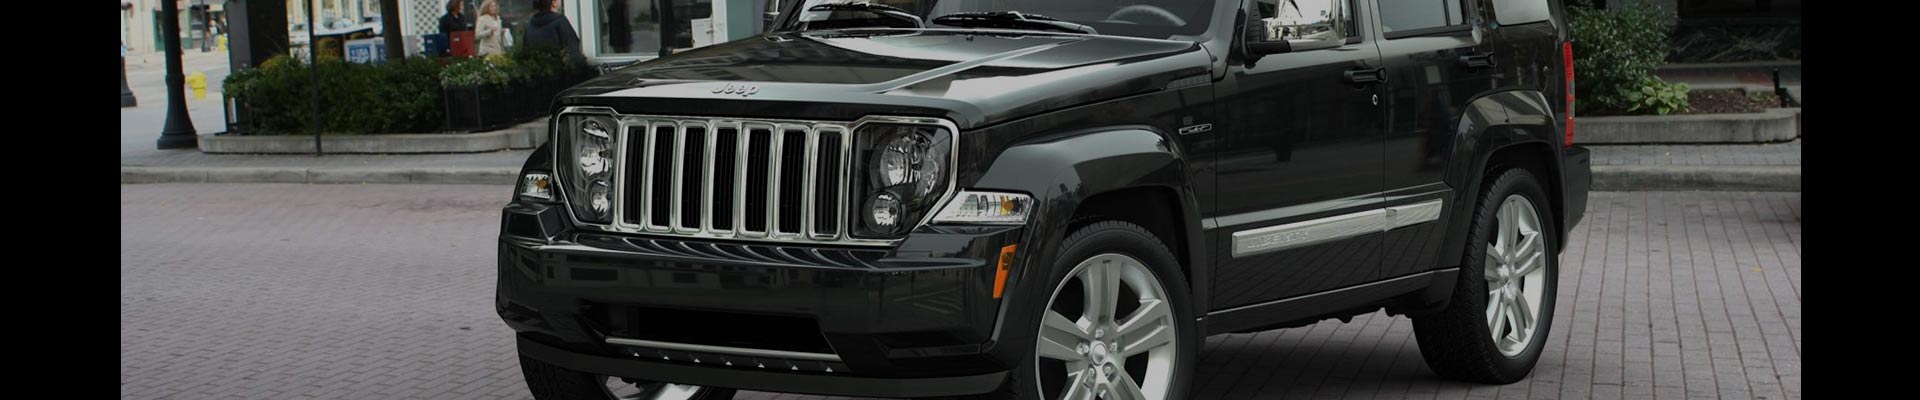 Shop Replacement and OEM 2007 Jeep Liberty Parts with Discounted Price on the Net